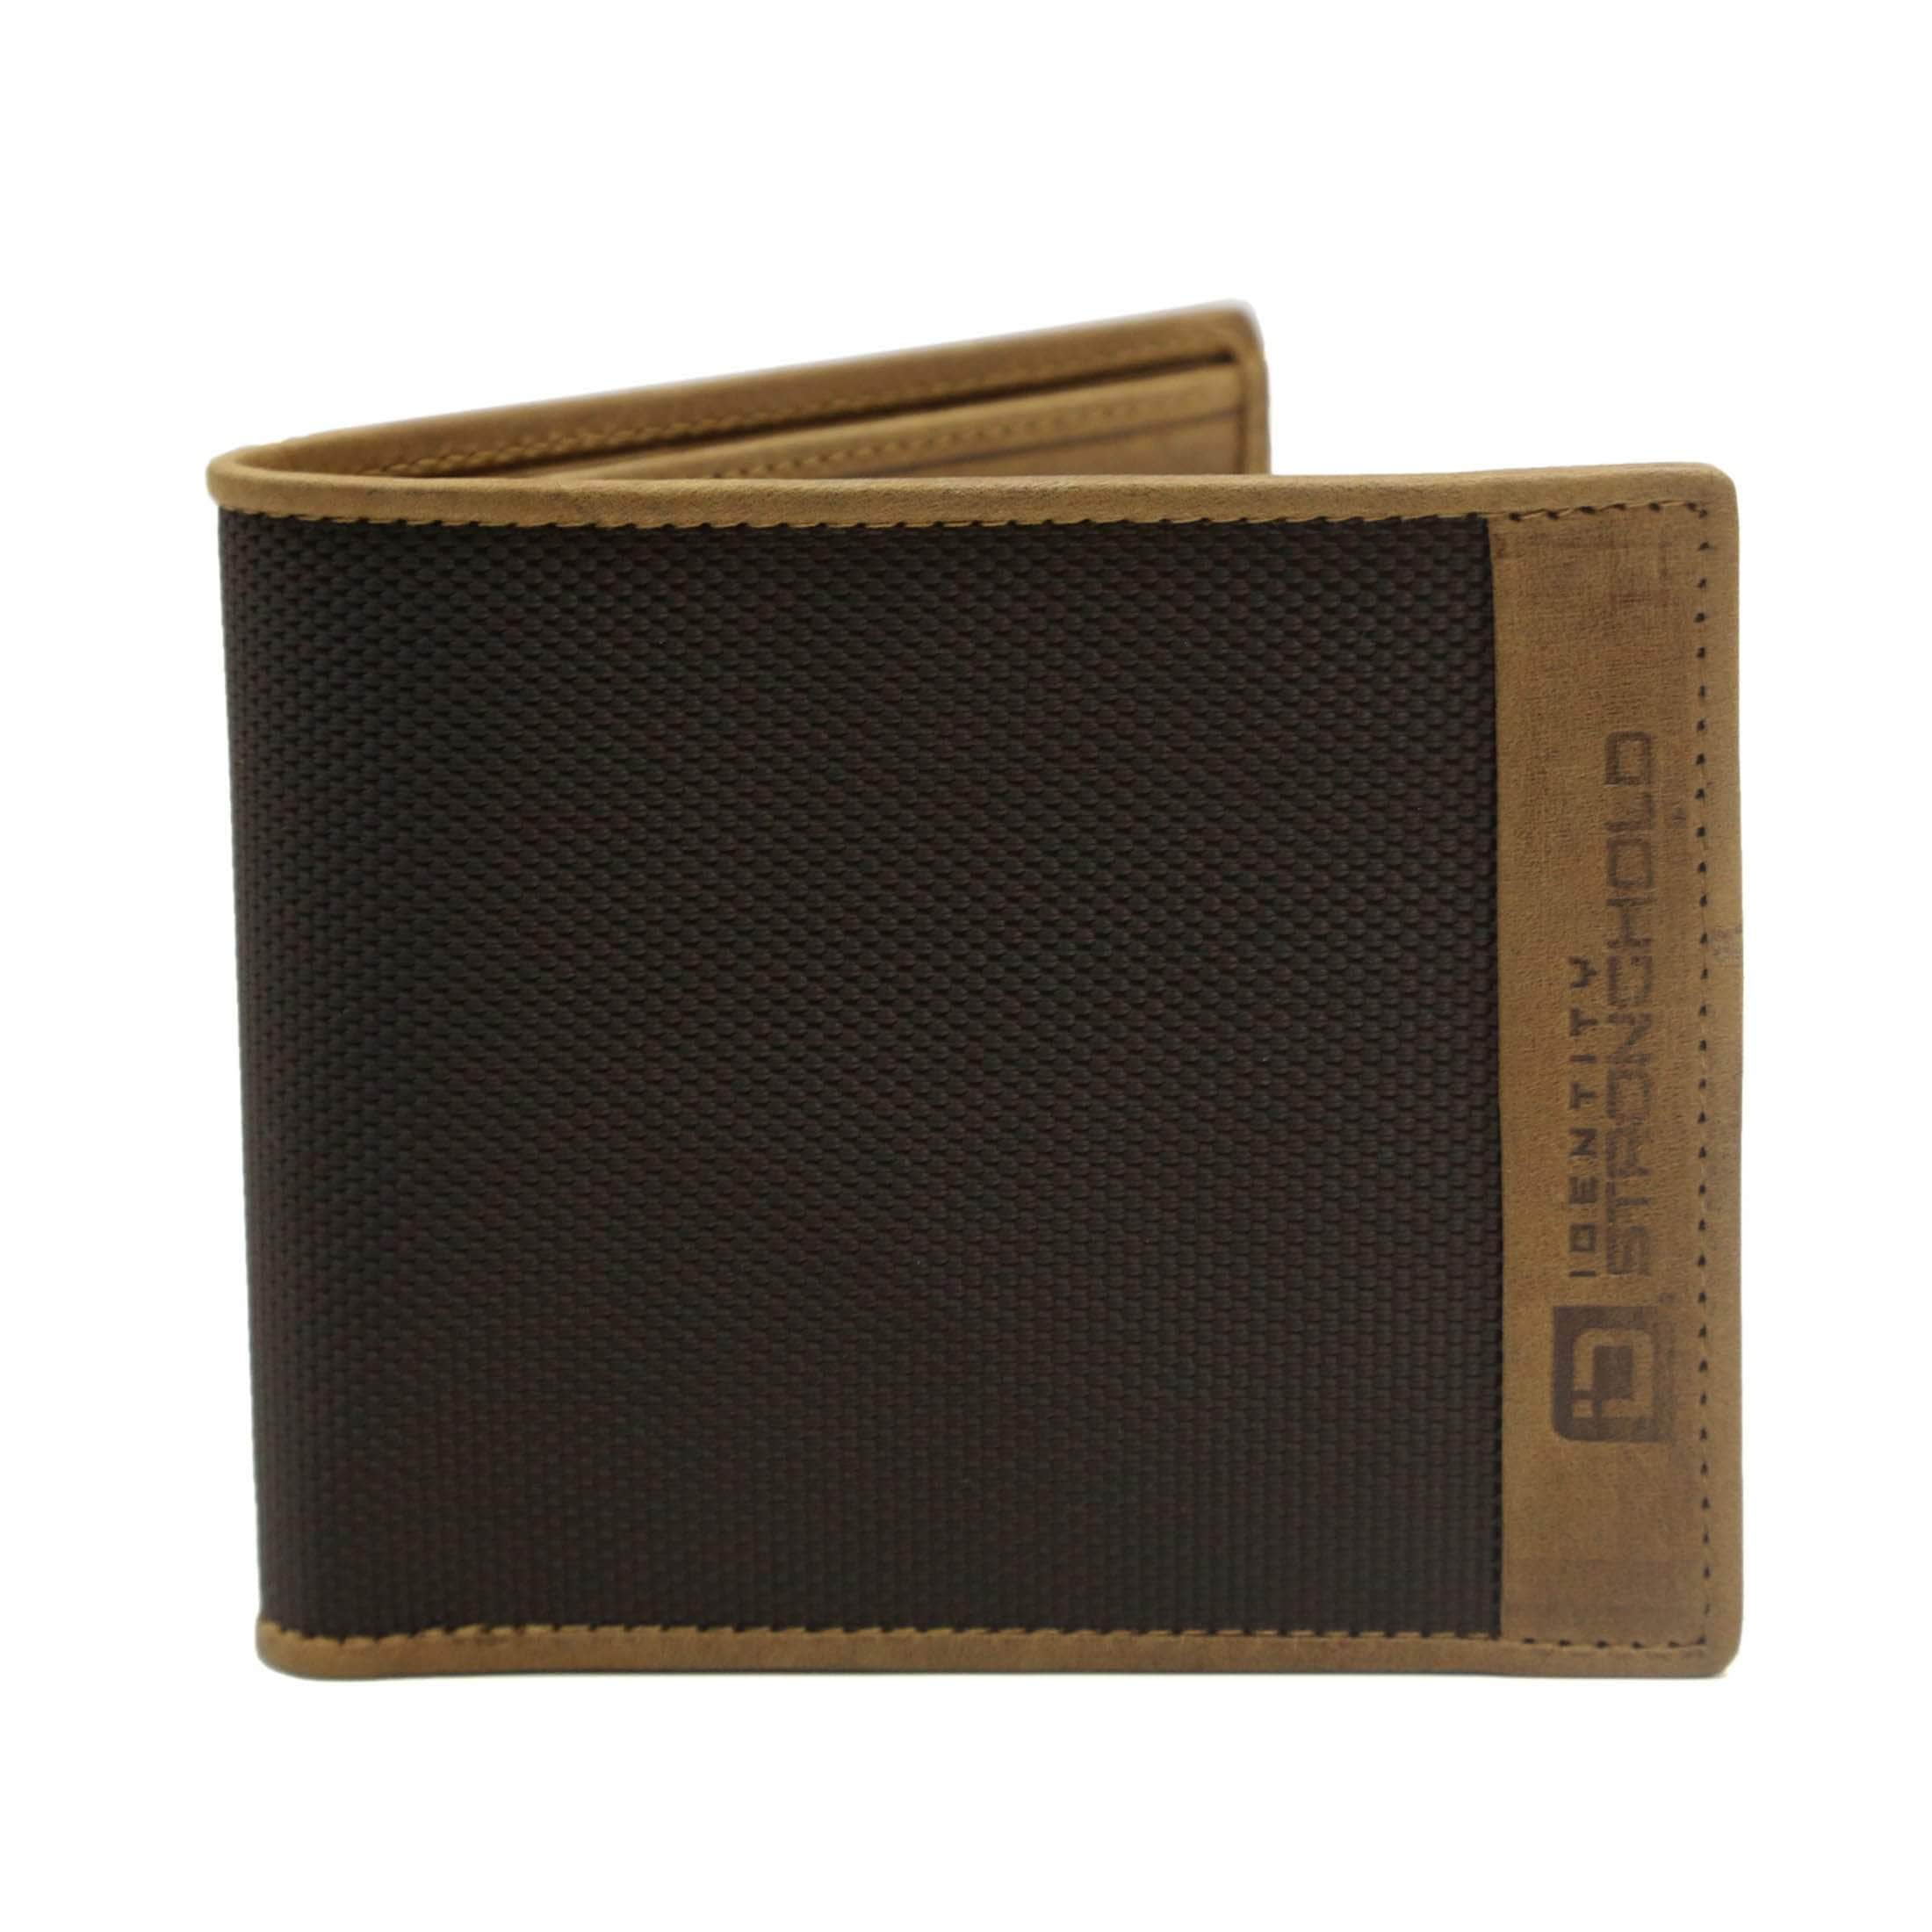 ID Stronghold Men's Wallet Brown Mens RFID Wallet - Slim 7 Slot Bifold With ID in Leather and Nylon